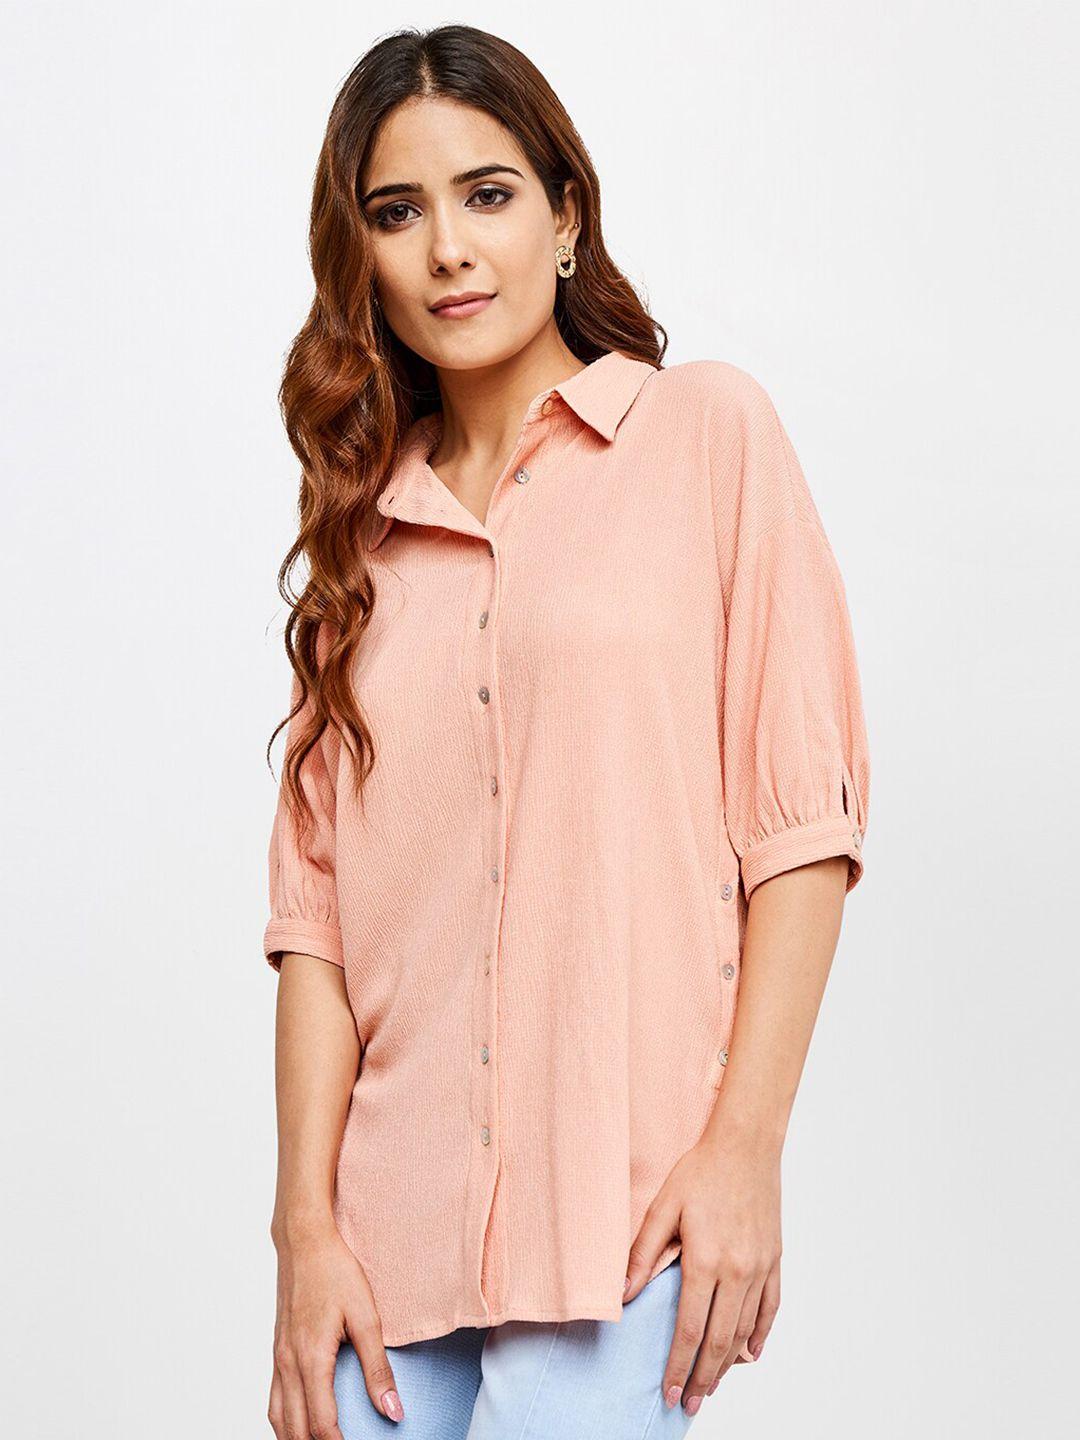 and peach-coloured shirt style longline top